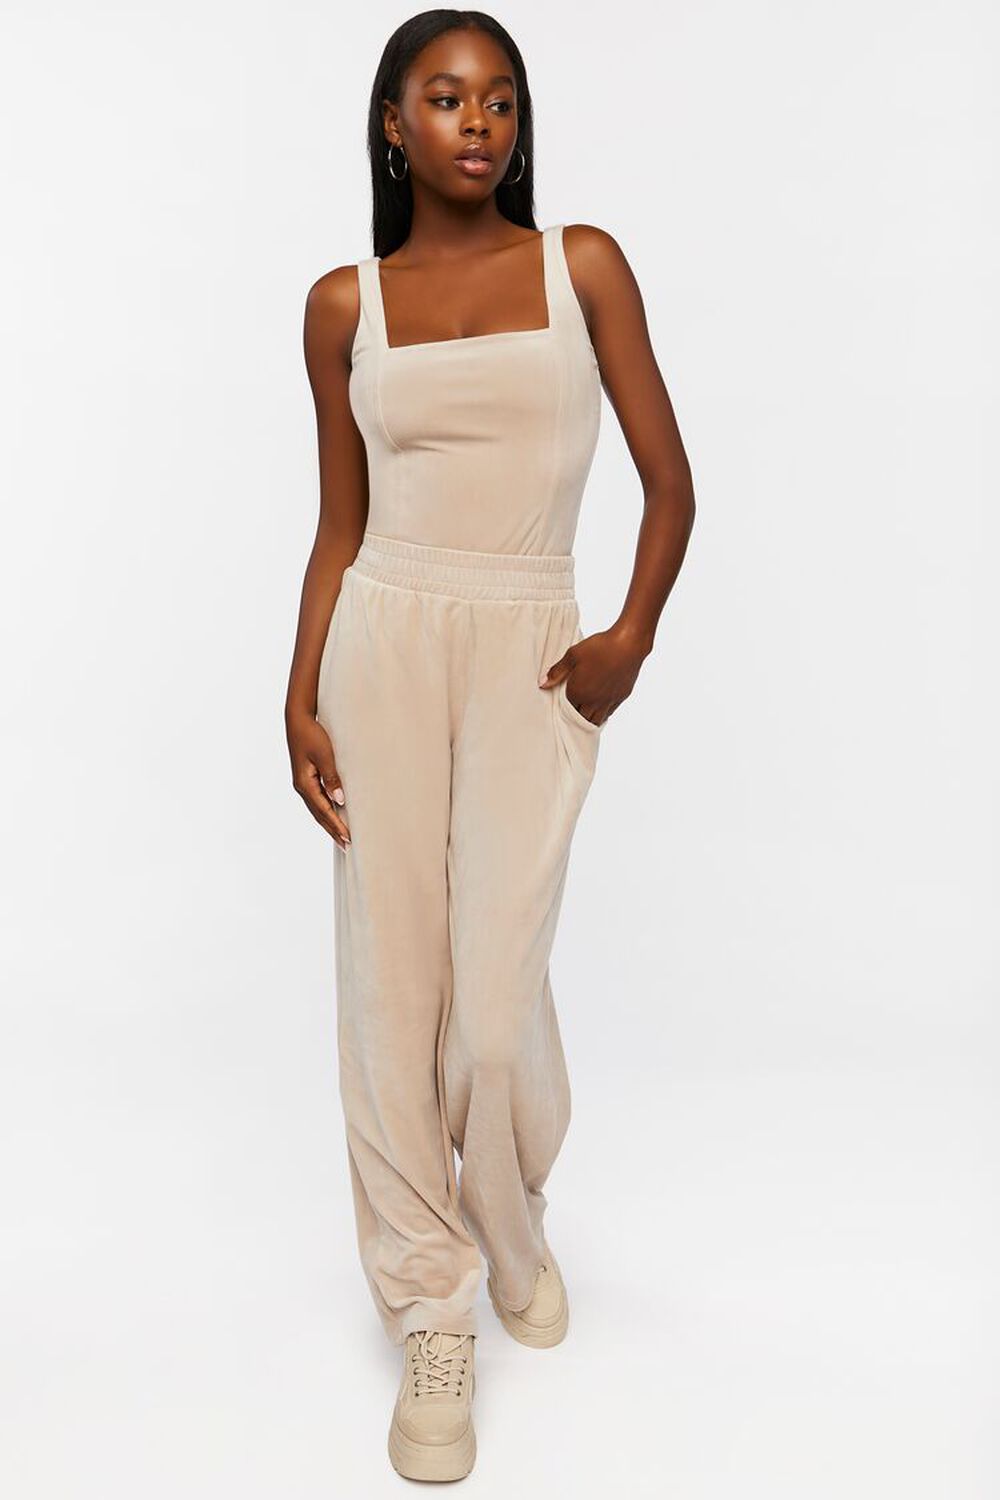 OYSTER GREY Velour Wide-Leg Pants, image 1